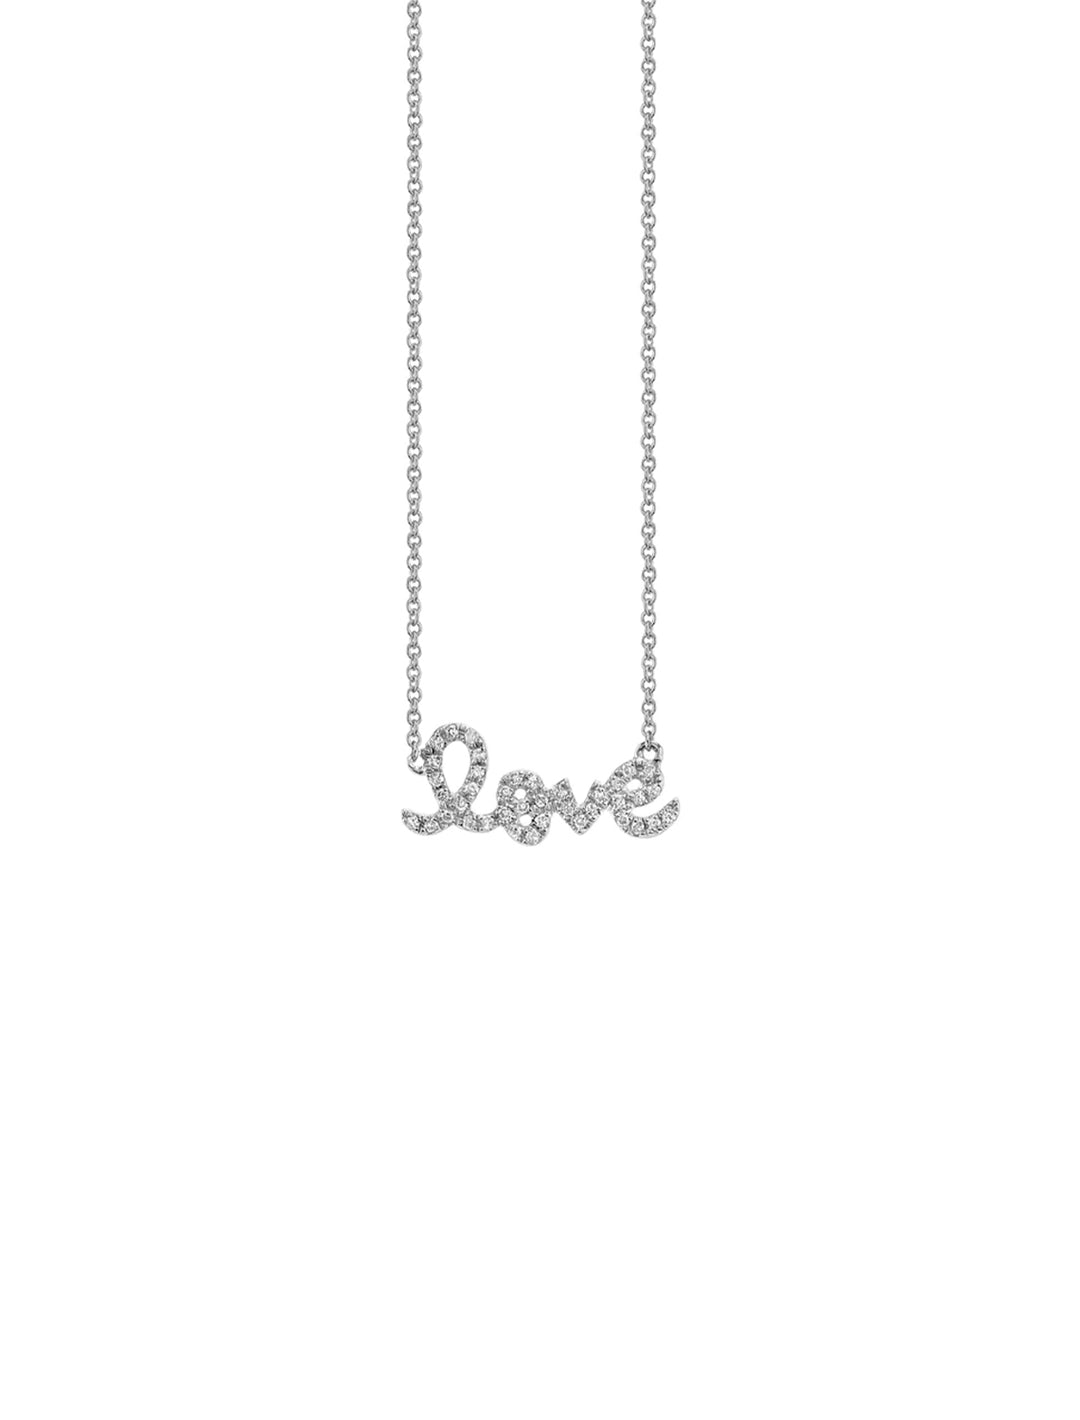 Sydney Evan's pave small love script necklace in white gold.